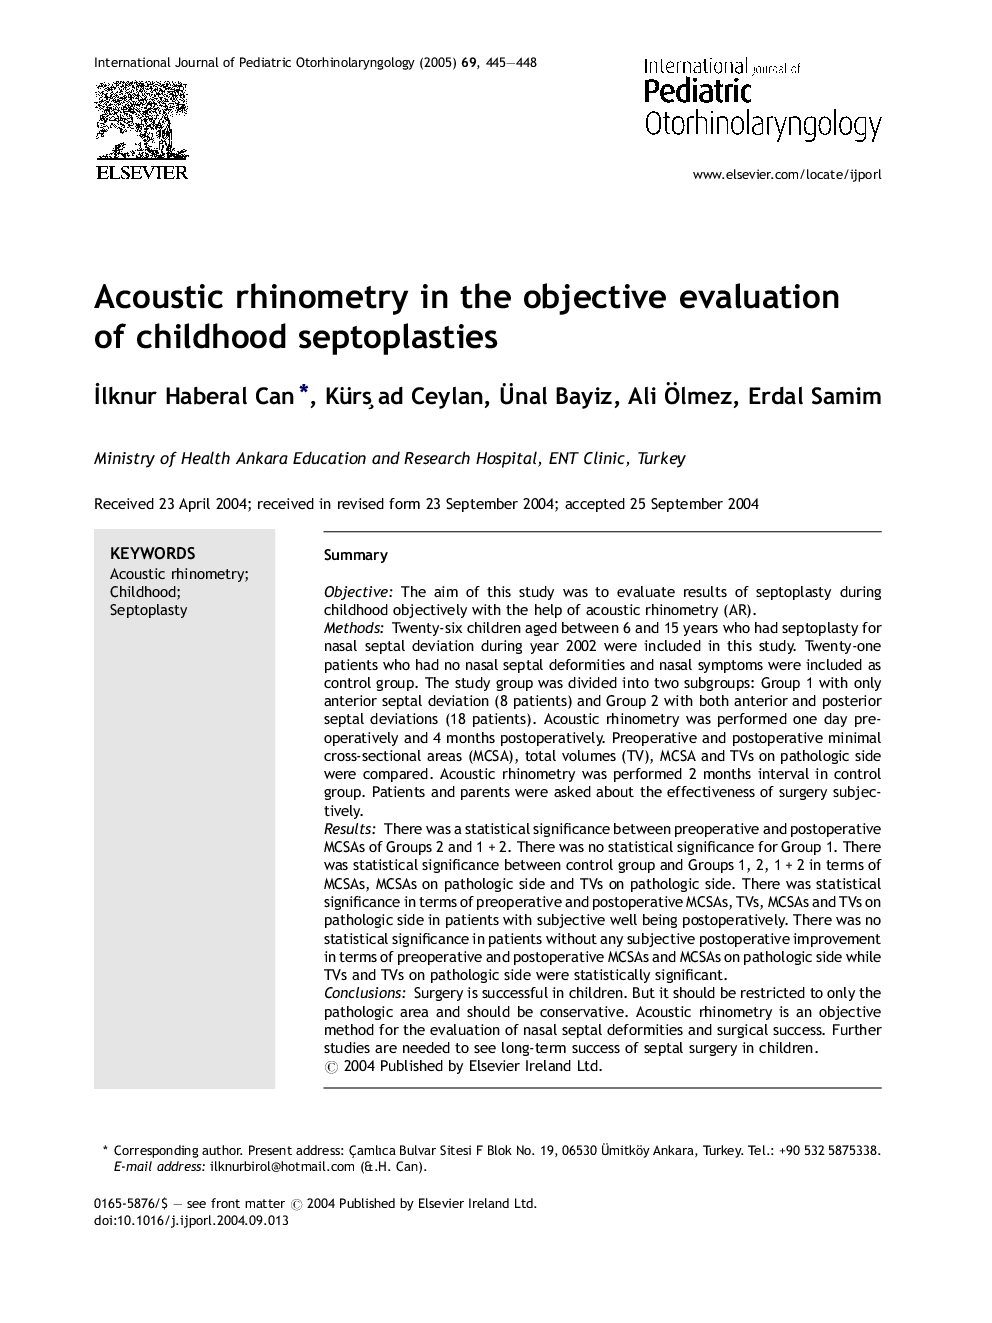 Acoustic rhinometry in the objective evaluation of childhood septoplasties